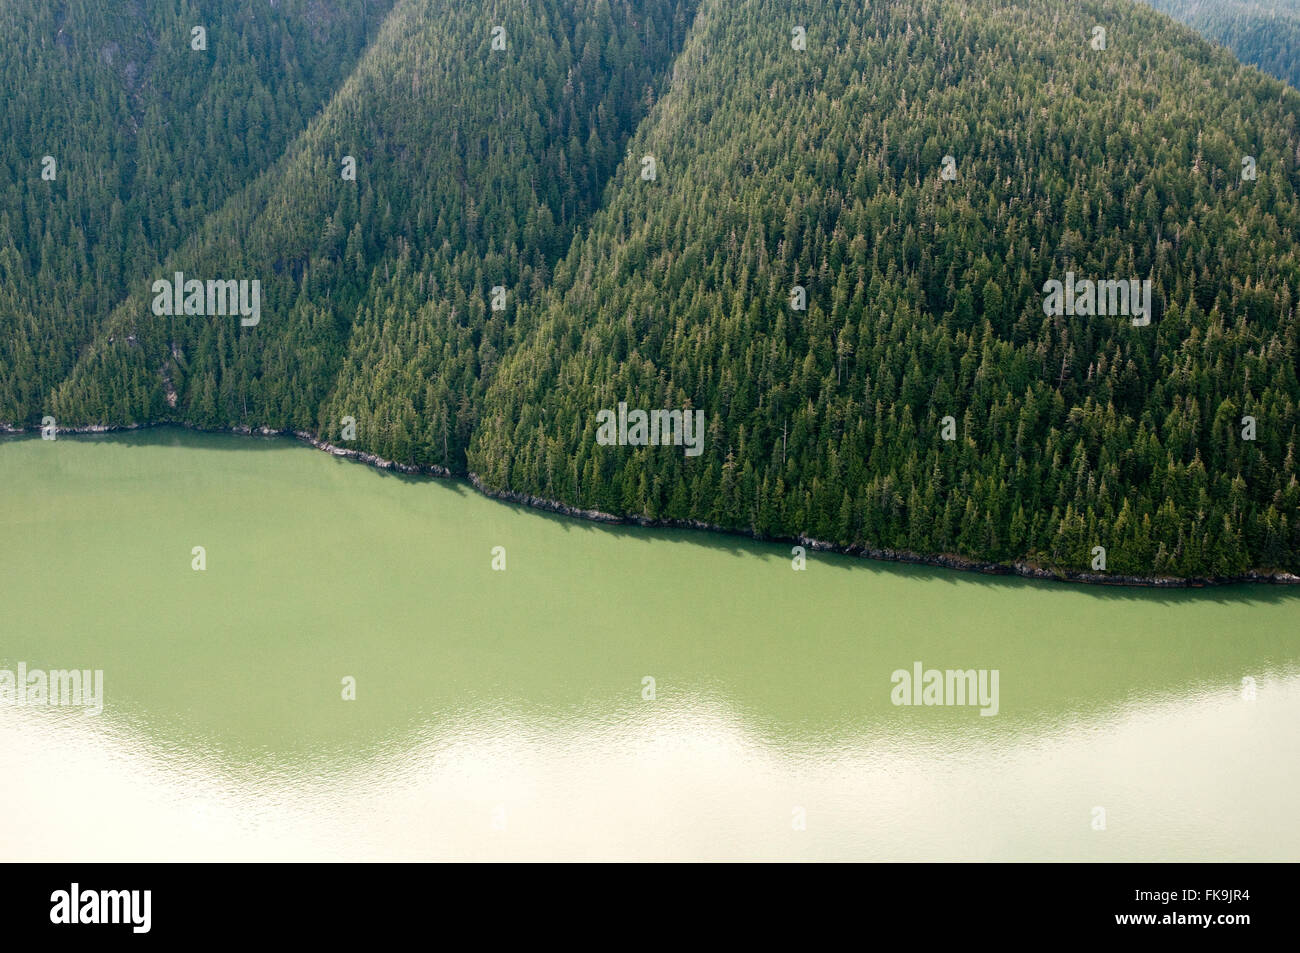 An aerial view of the glacial silt filled waters of Rivers Inlet, in the Great Bear Rainforest, central Pacific coast of British Columbia, Canada. Stock Photo